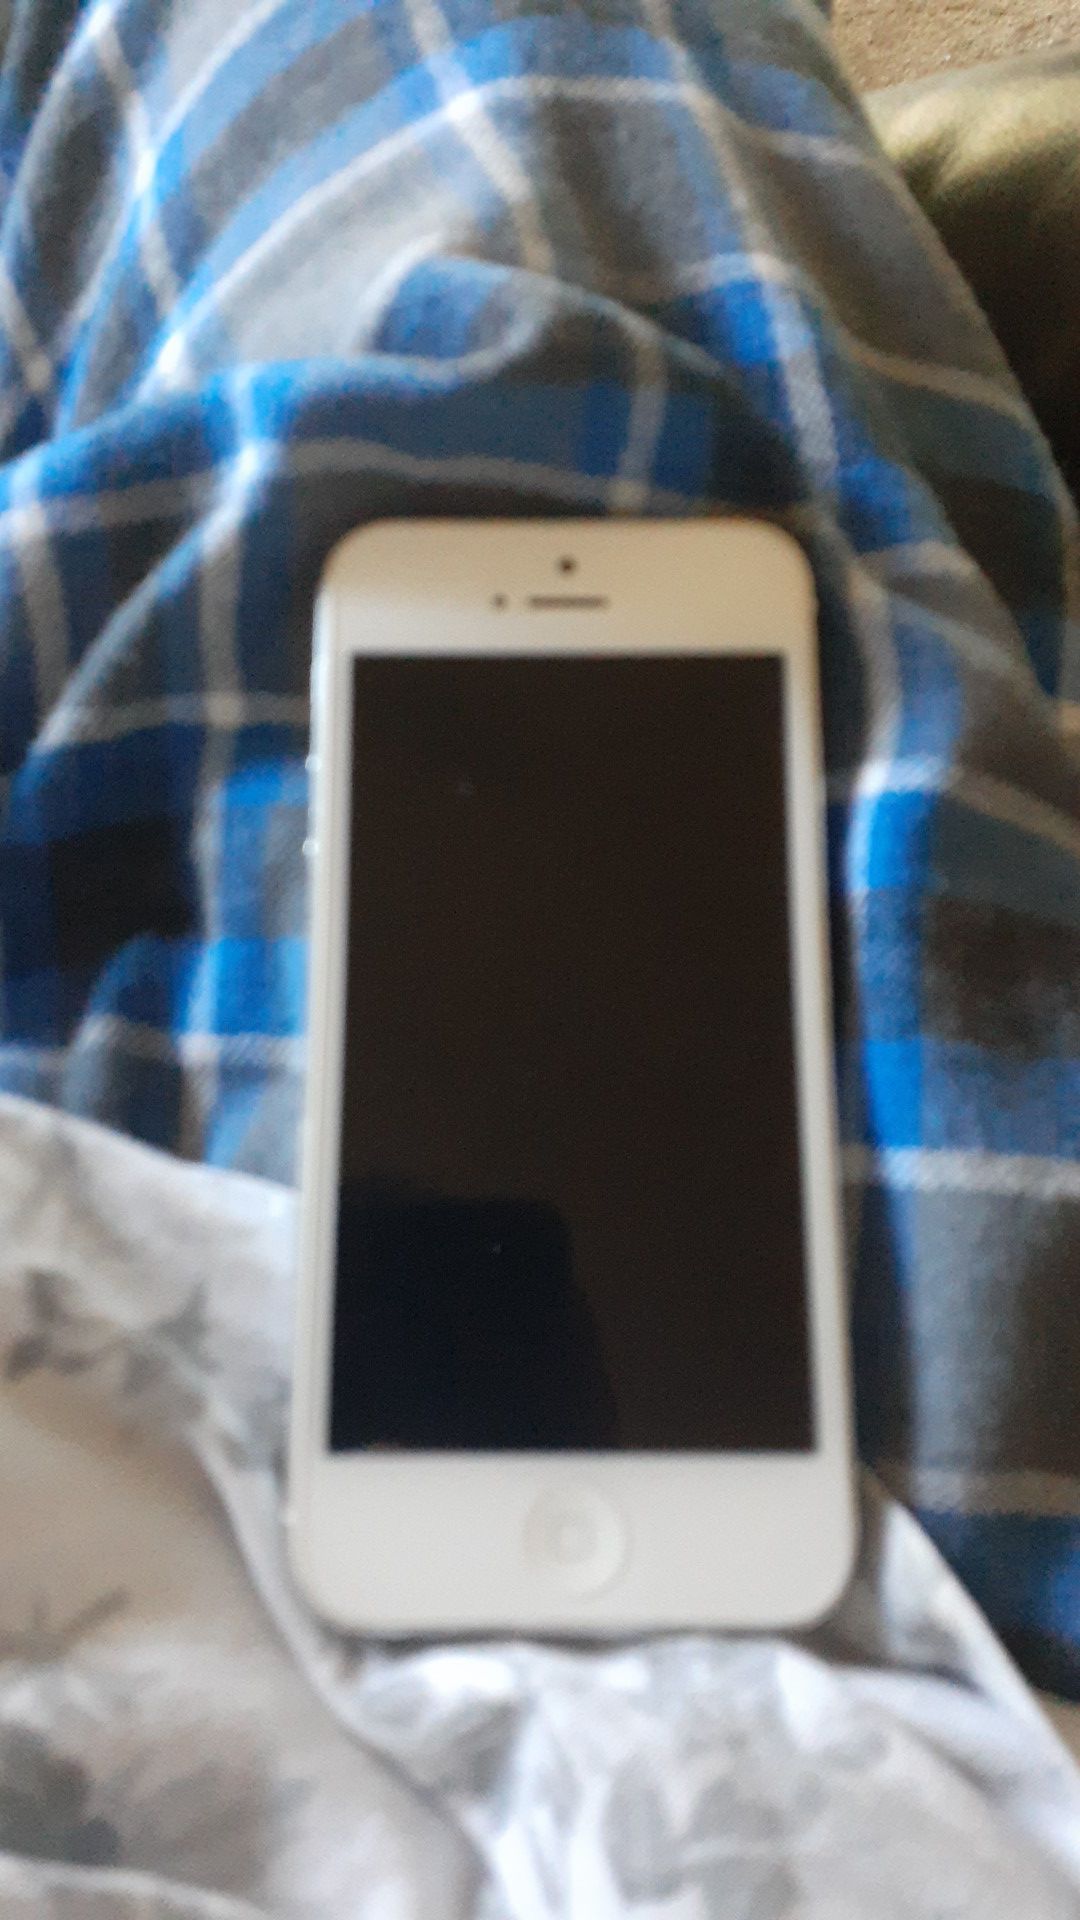 iPhone 5 very good condition